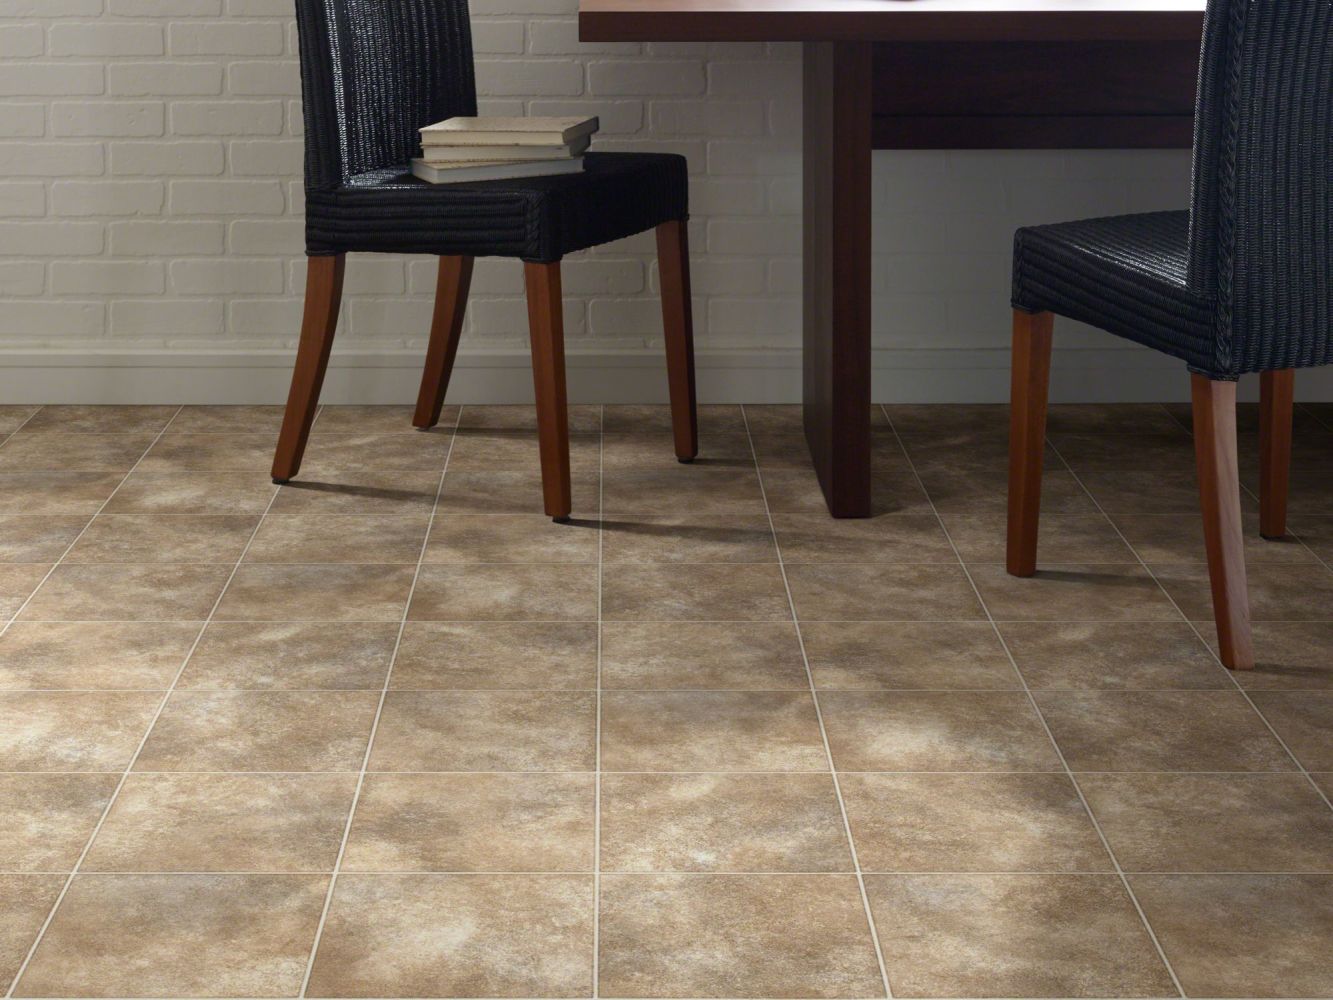 Shaw Floors Resilient Property Solutions Pro 12 Classics Taupe 00738_VG054